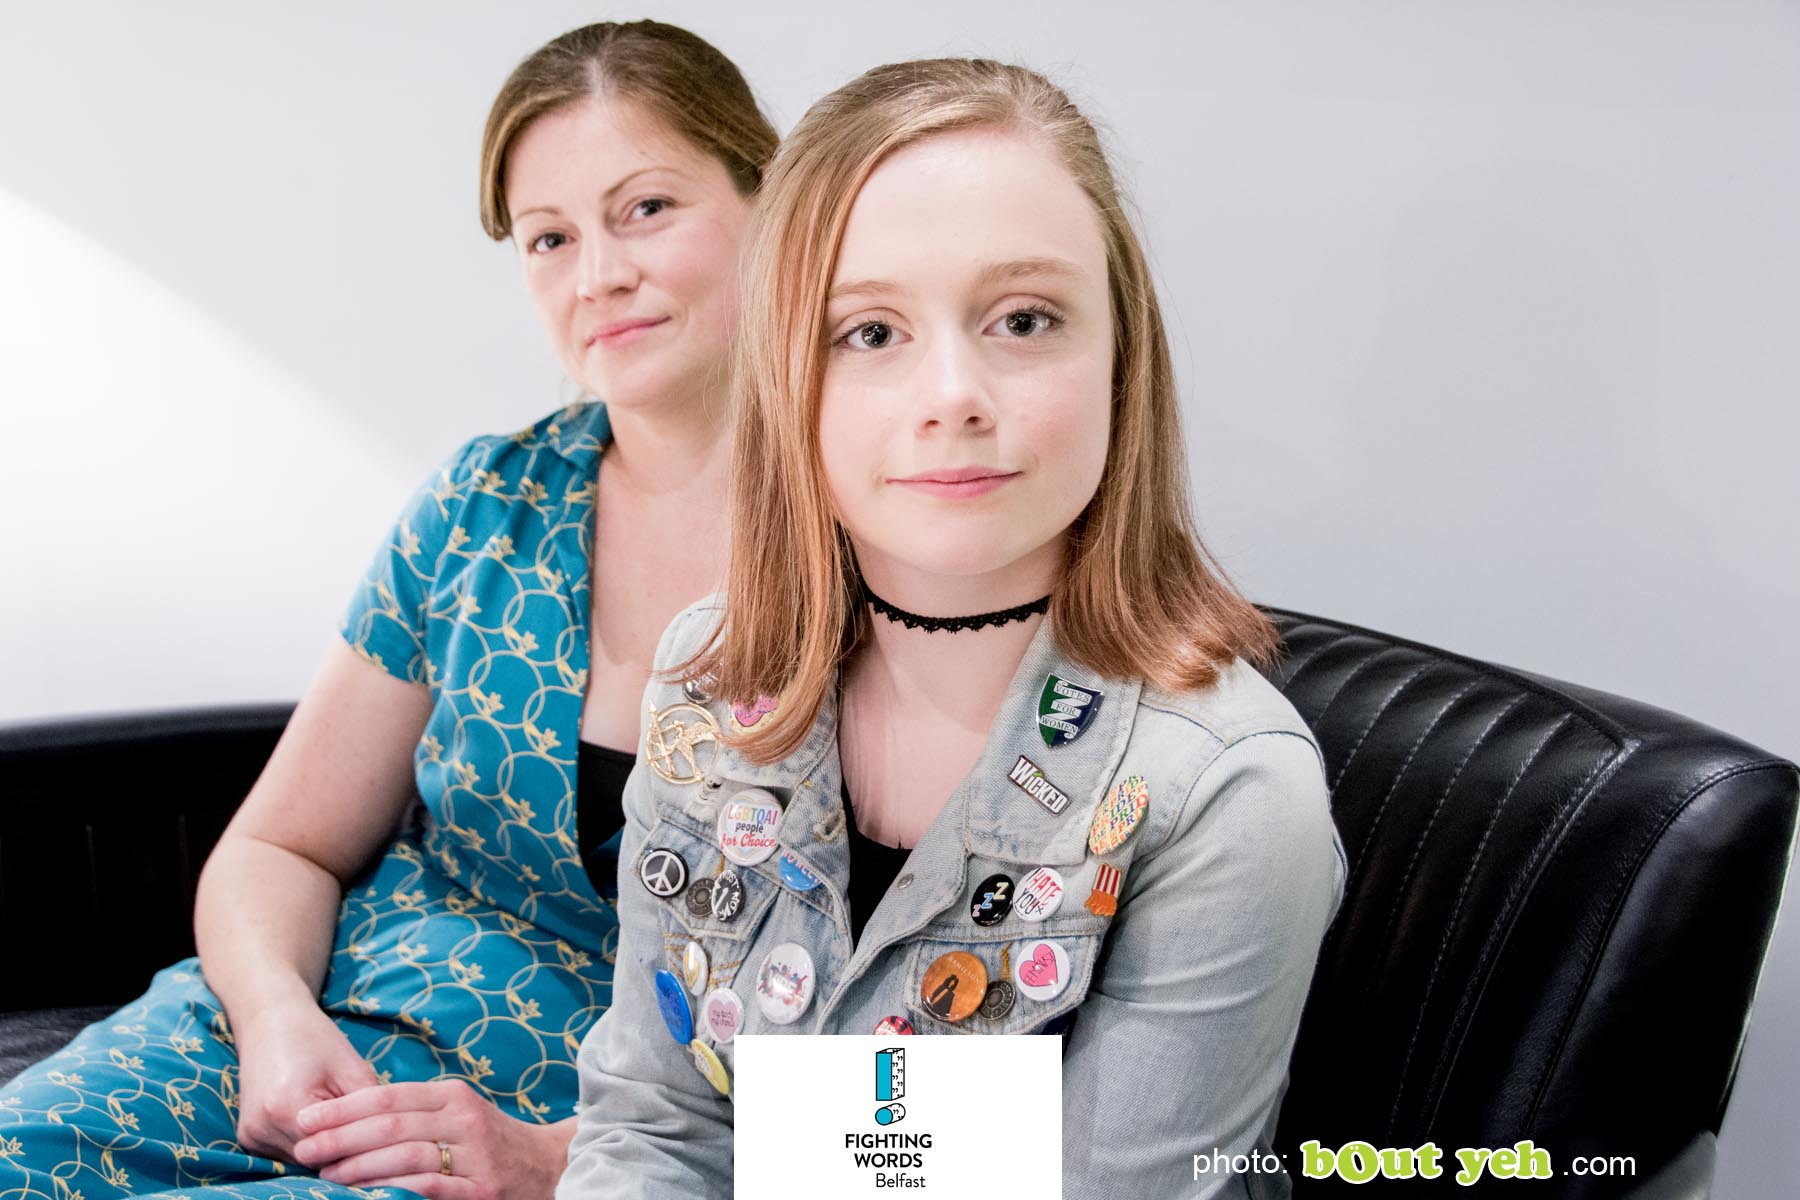 Image - Sophia and Kelly of Write Club by Bout yeh photographers Belfast - photo 6251